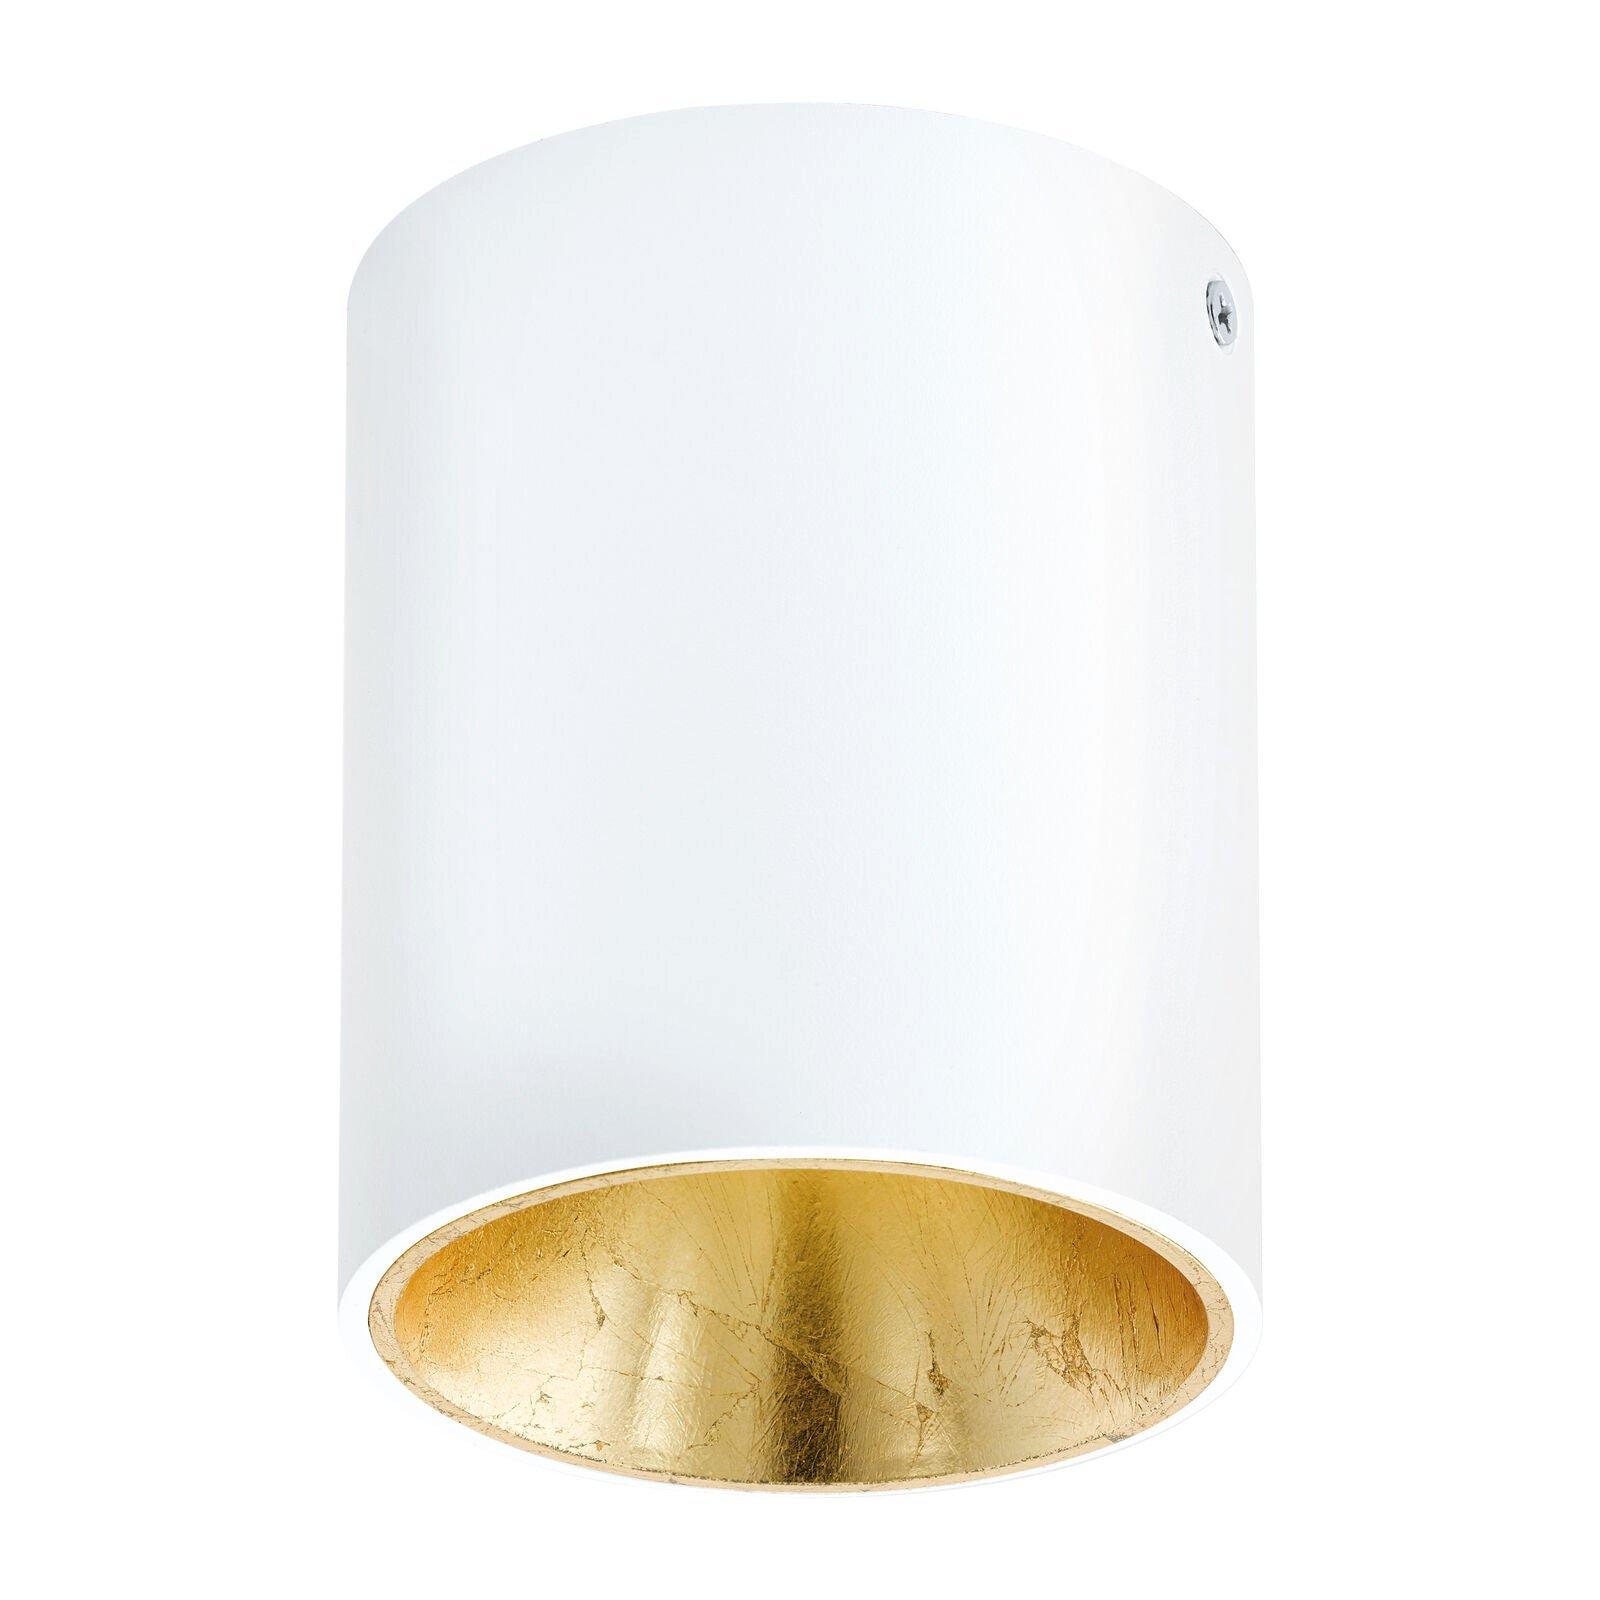 Wall / Ceiling Light White & Gold Round Downlight 3.3W Built in LED